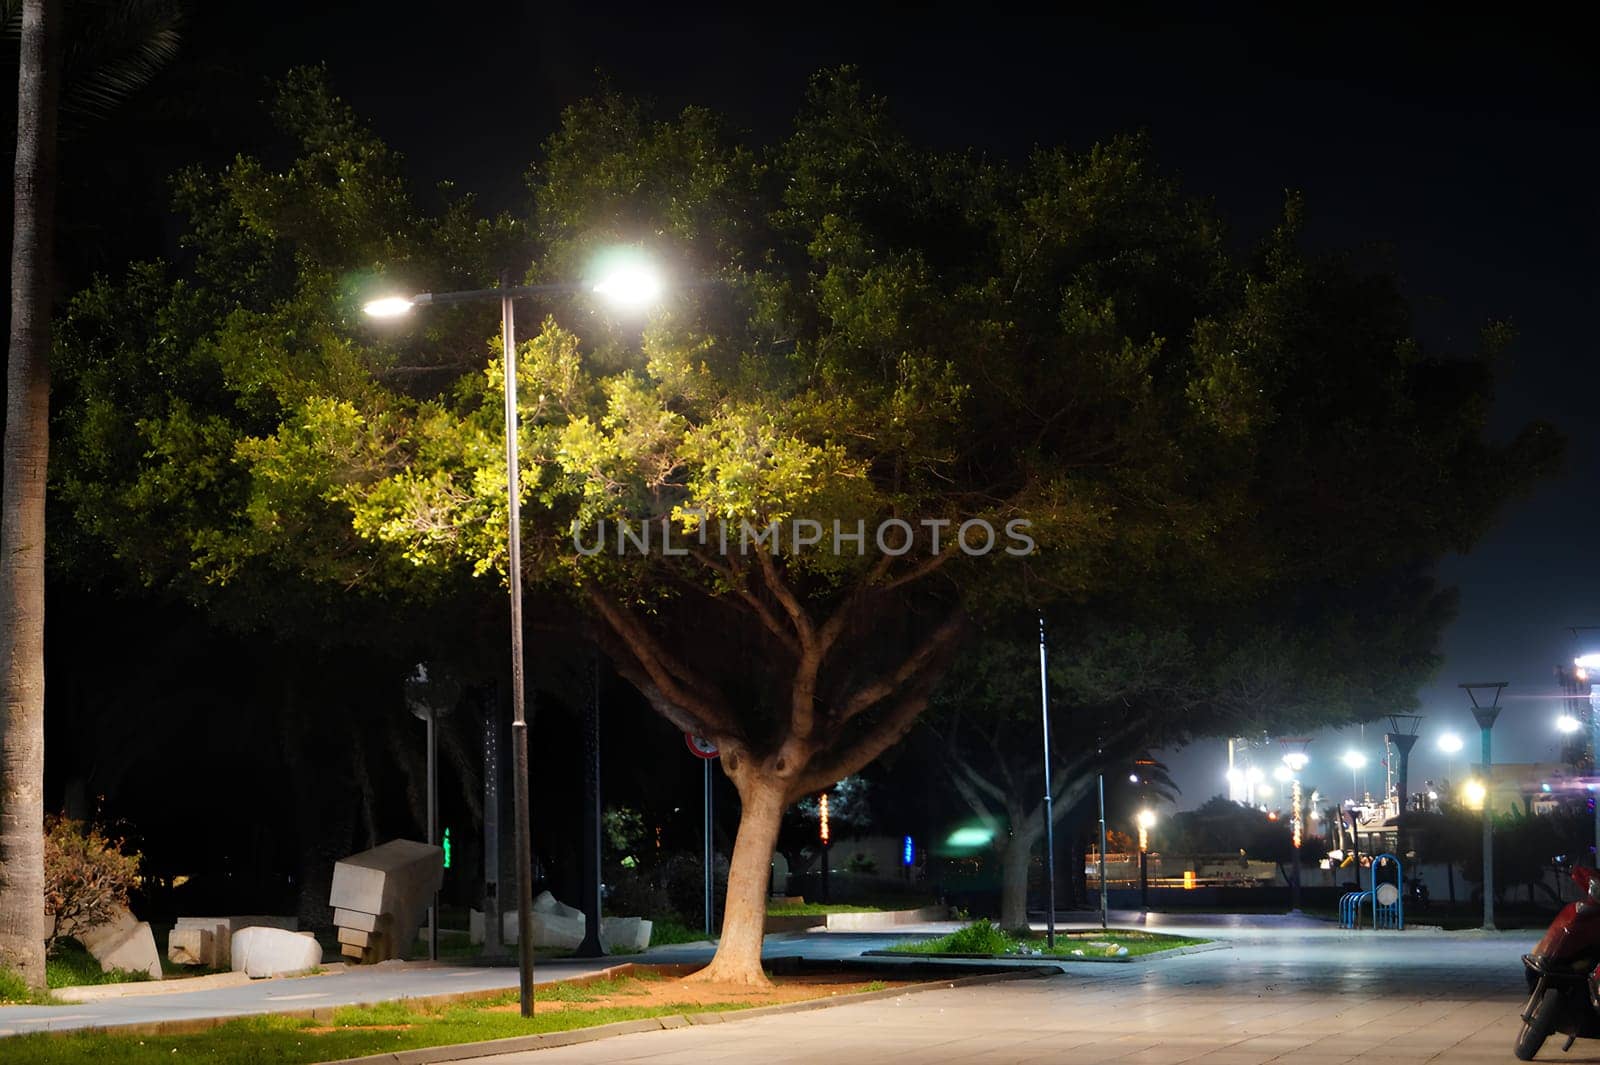 A tree is lit up at night, with a street light shining on it